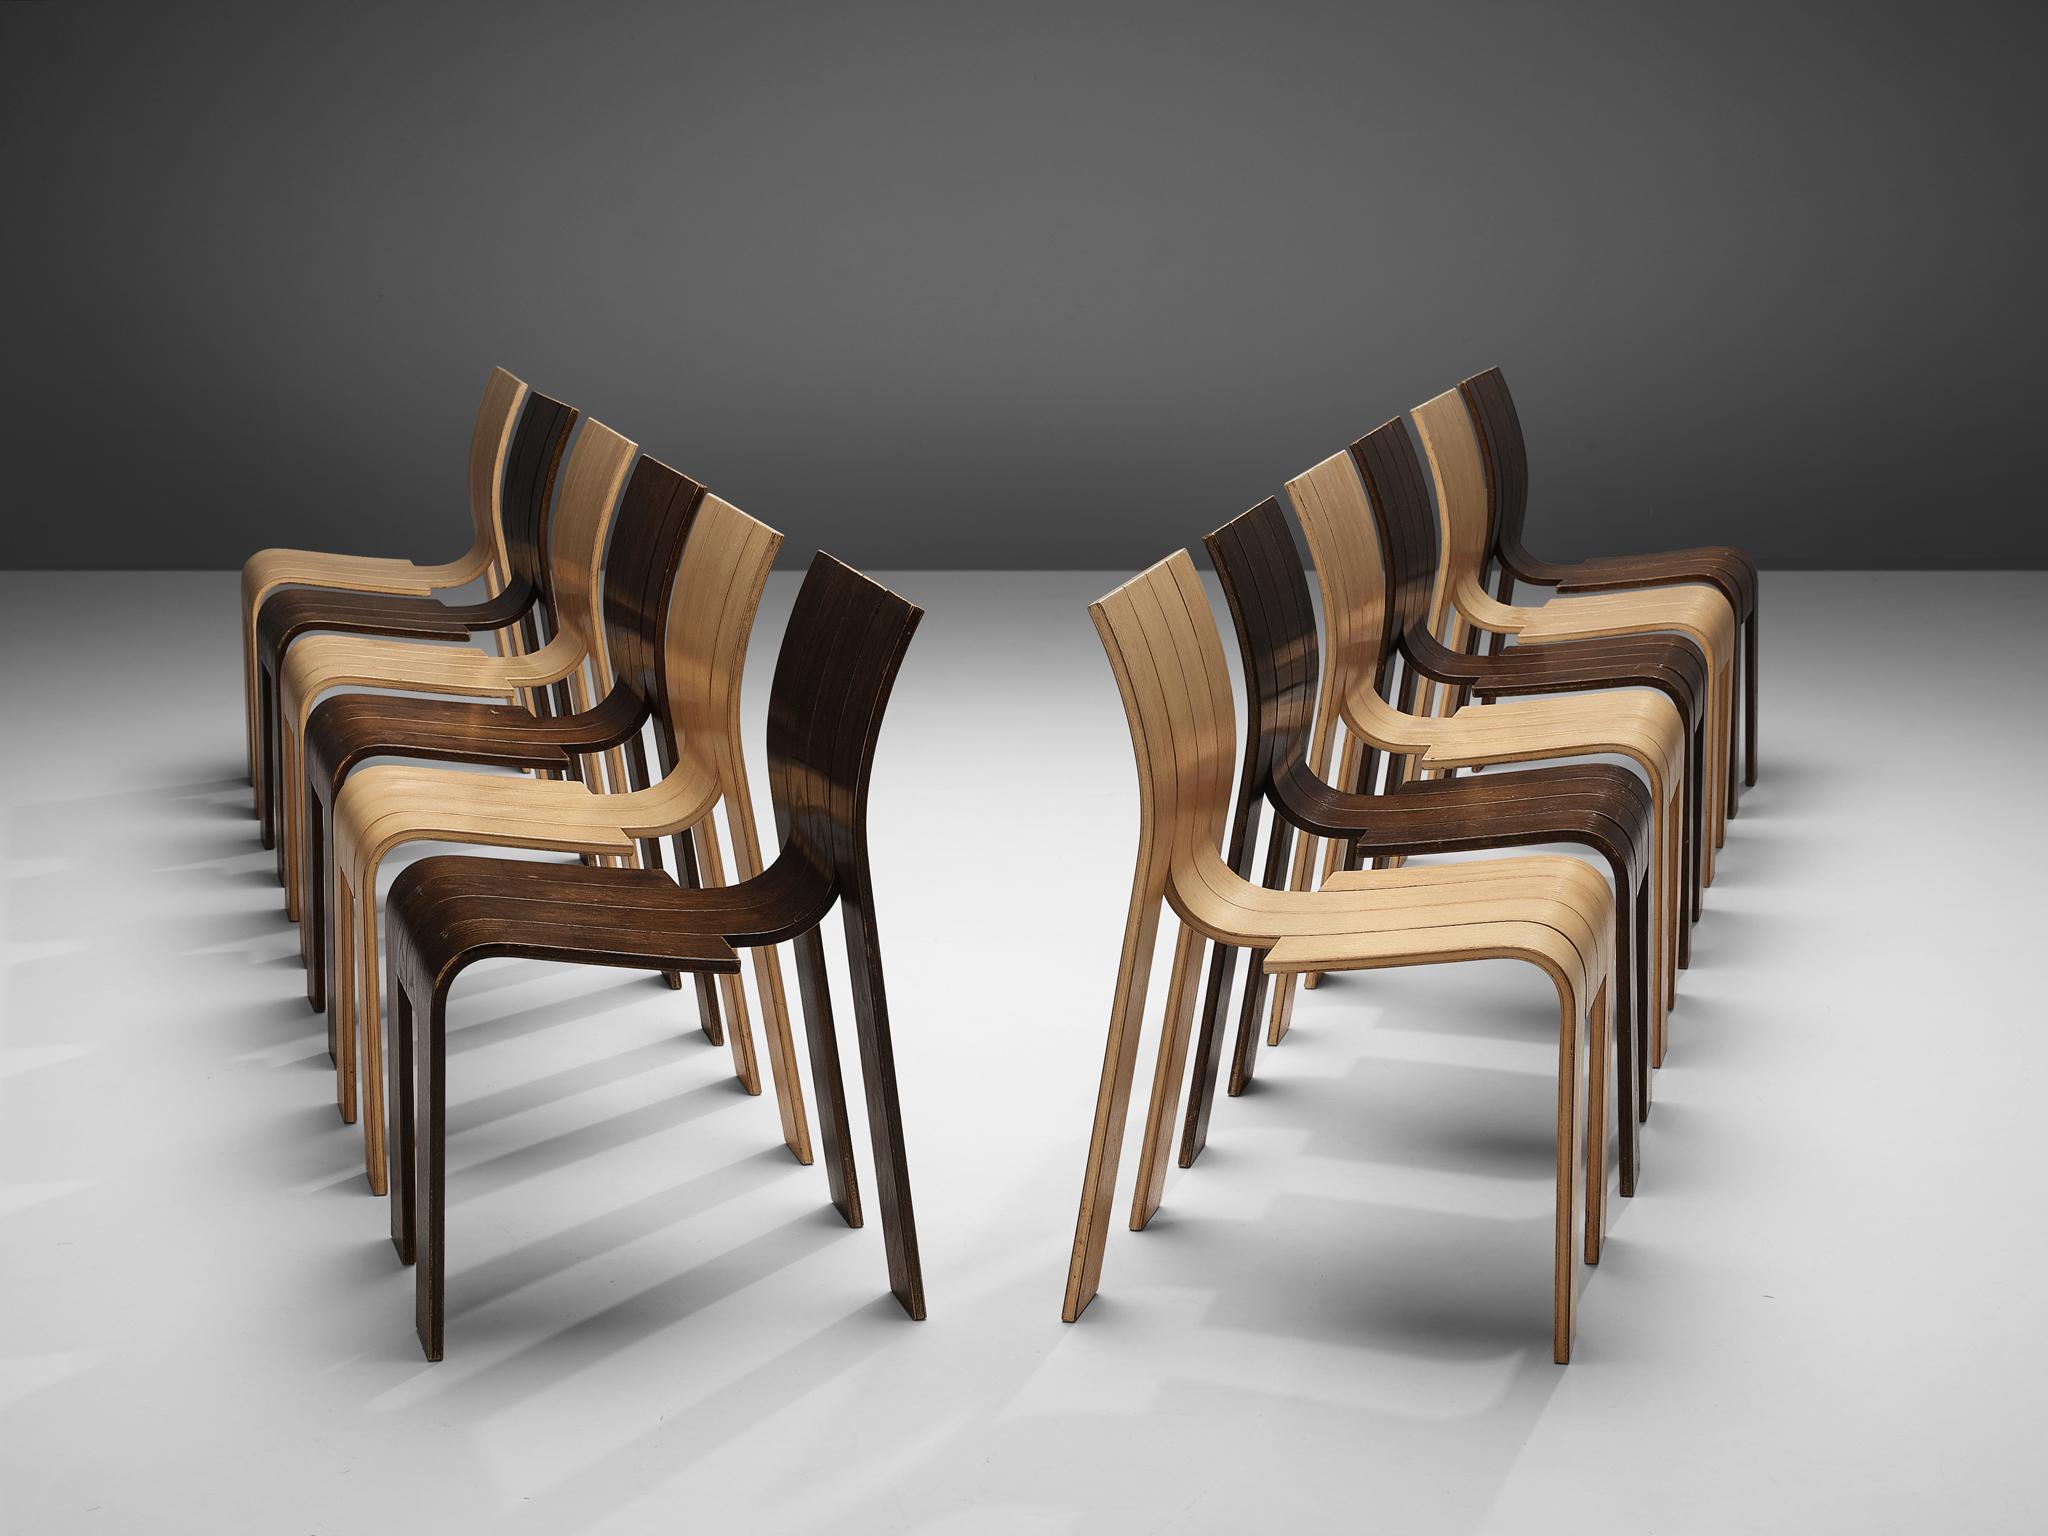 Gijs Bakker for Castelijn, bicolor set of twelve 'Strip' dining chairs, wood, the Netherlands, 1974

An inventive design that consists of four curved strips that are connected to each other in without any joints. The curved strips form together a